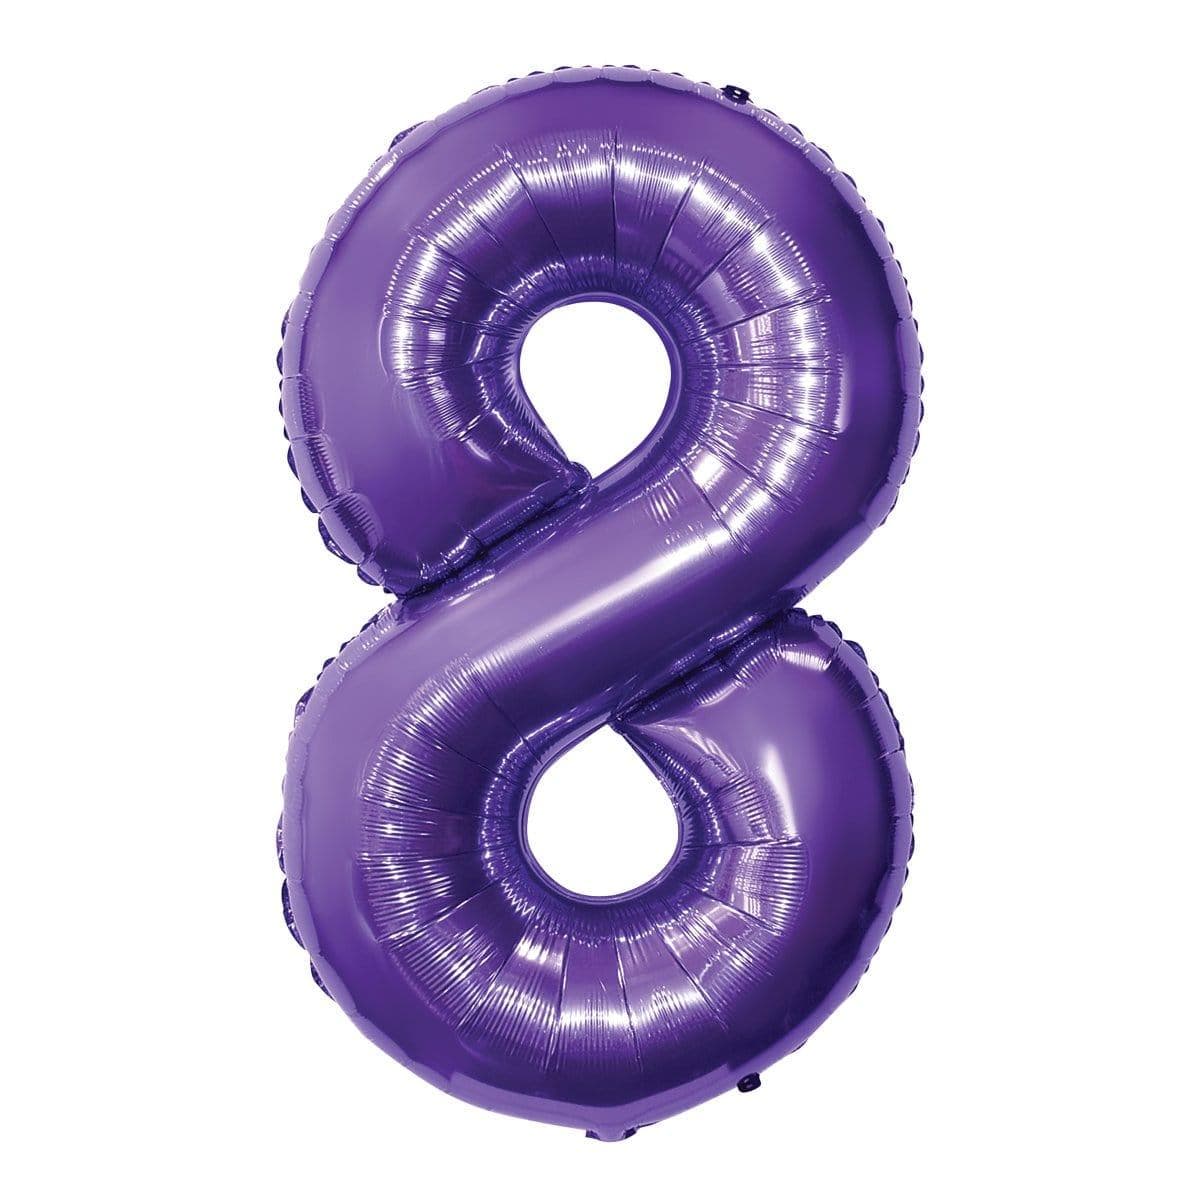 Buy Balloons Purple Number 8 Foil Balloon, 34 Inches sold at Party Expert